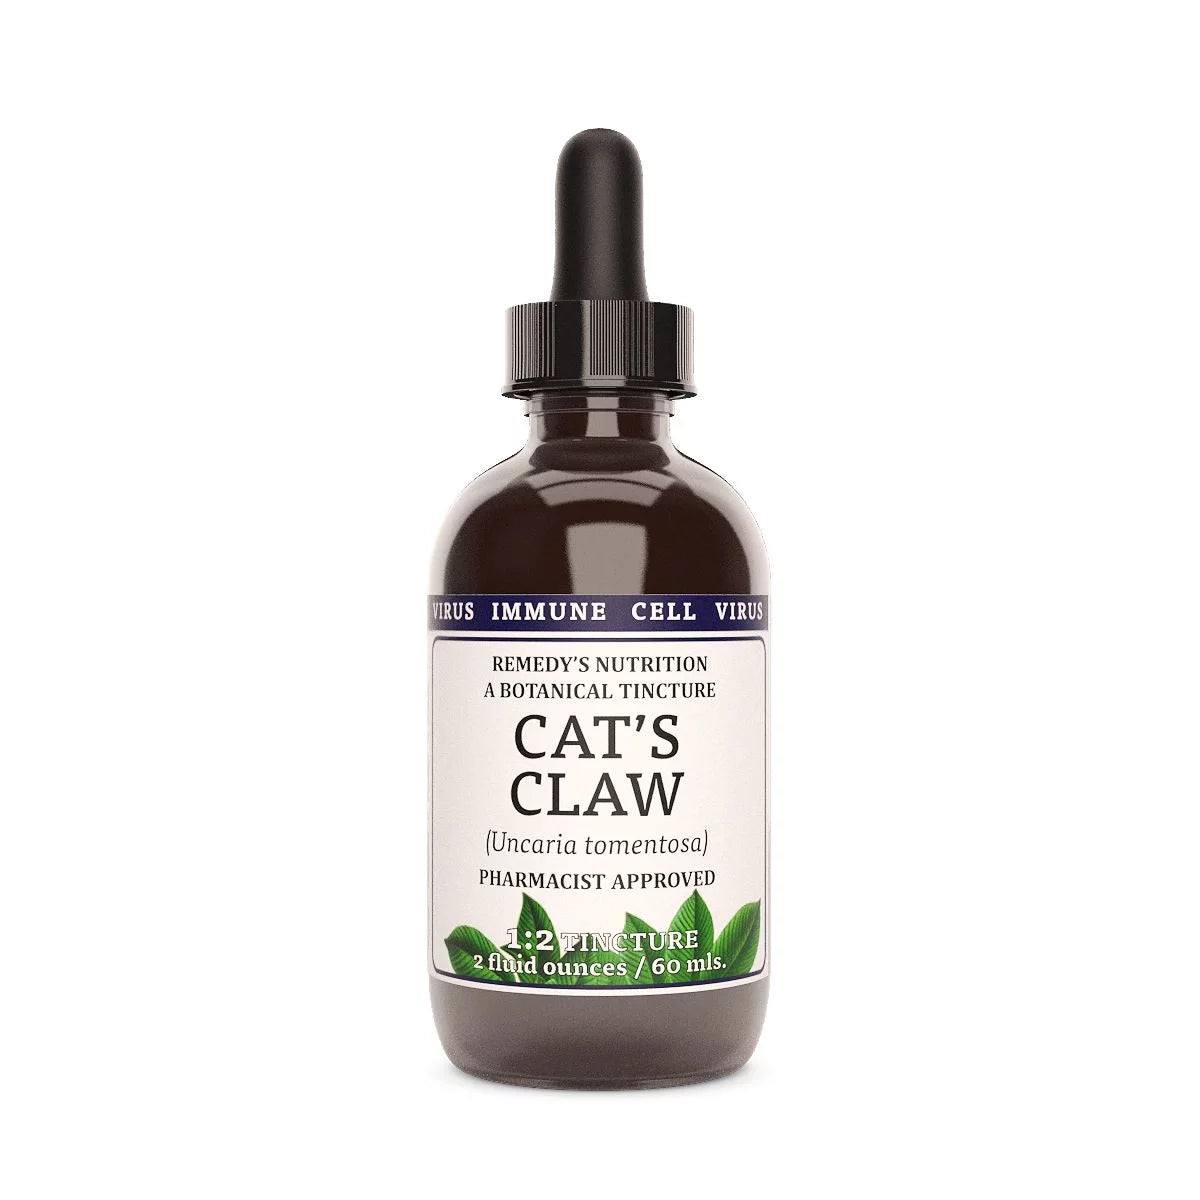 Image of Remedy's Nutrition® Cat's Claw Tincture Dietary Herbal Supplement front bottle. Made in the USA. Uncaria tomentosa.